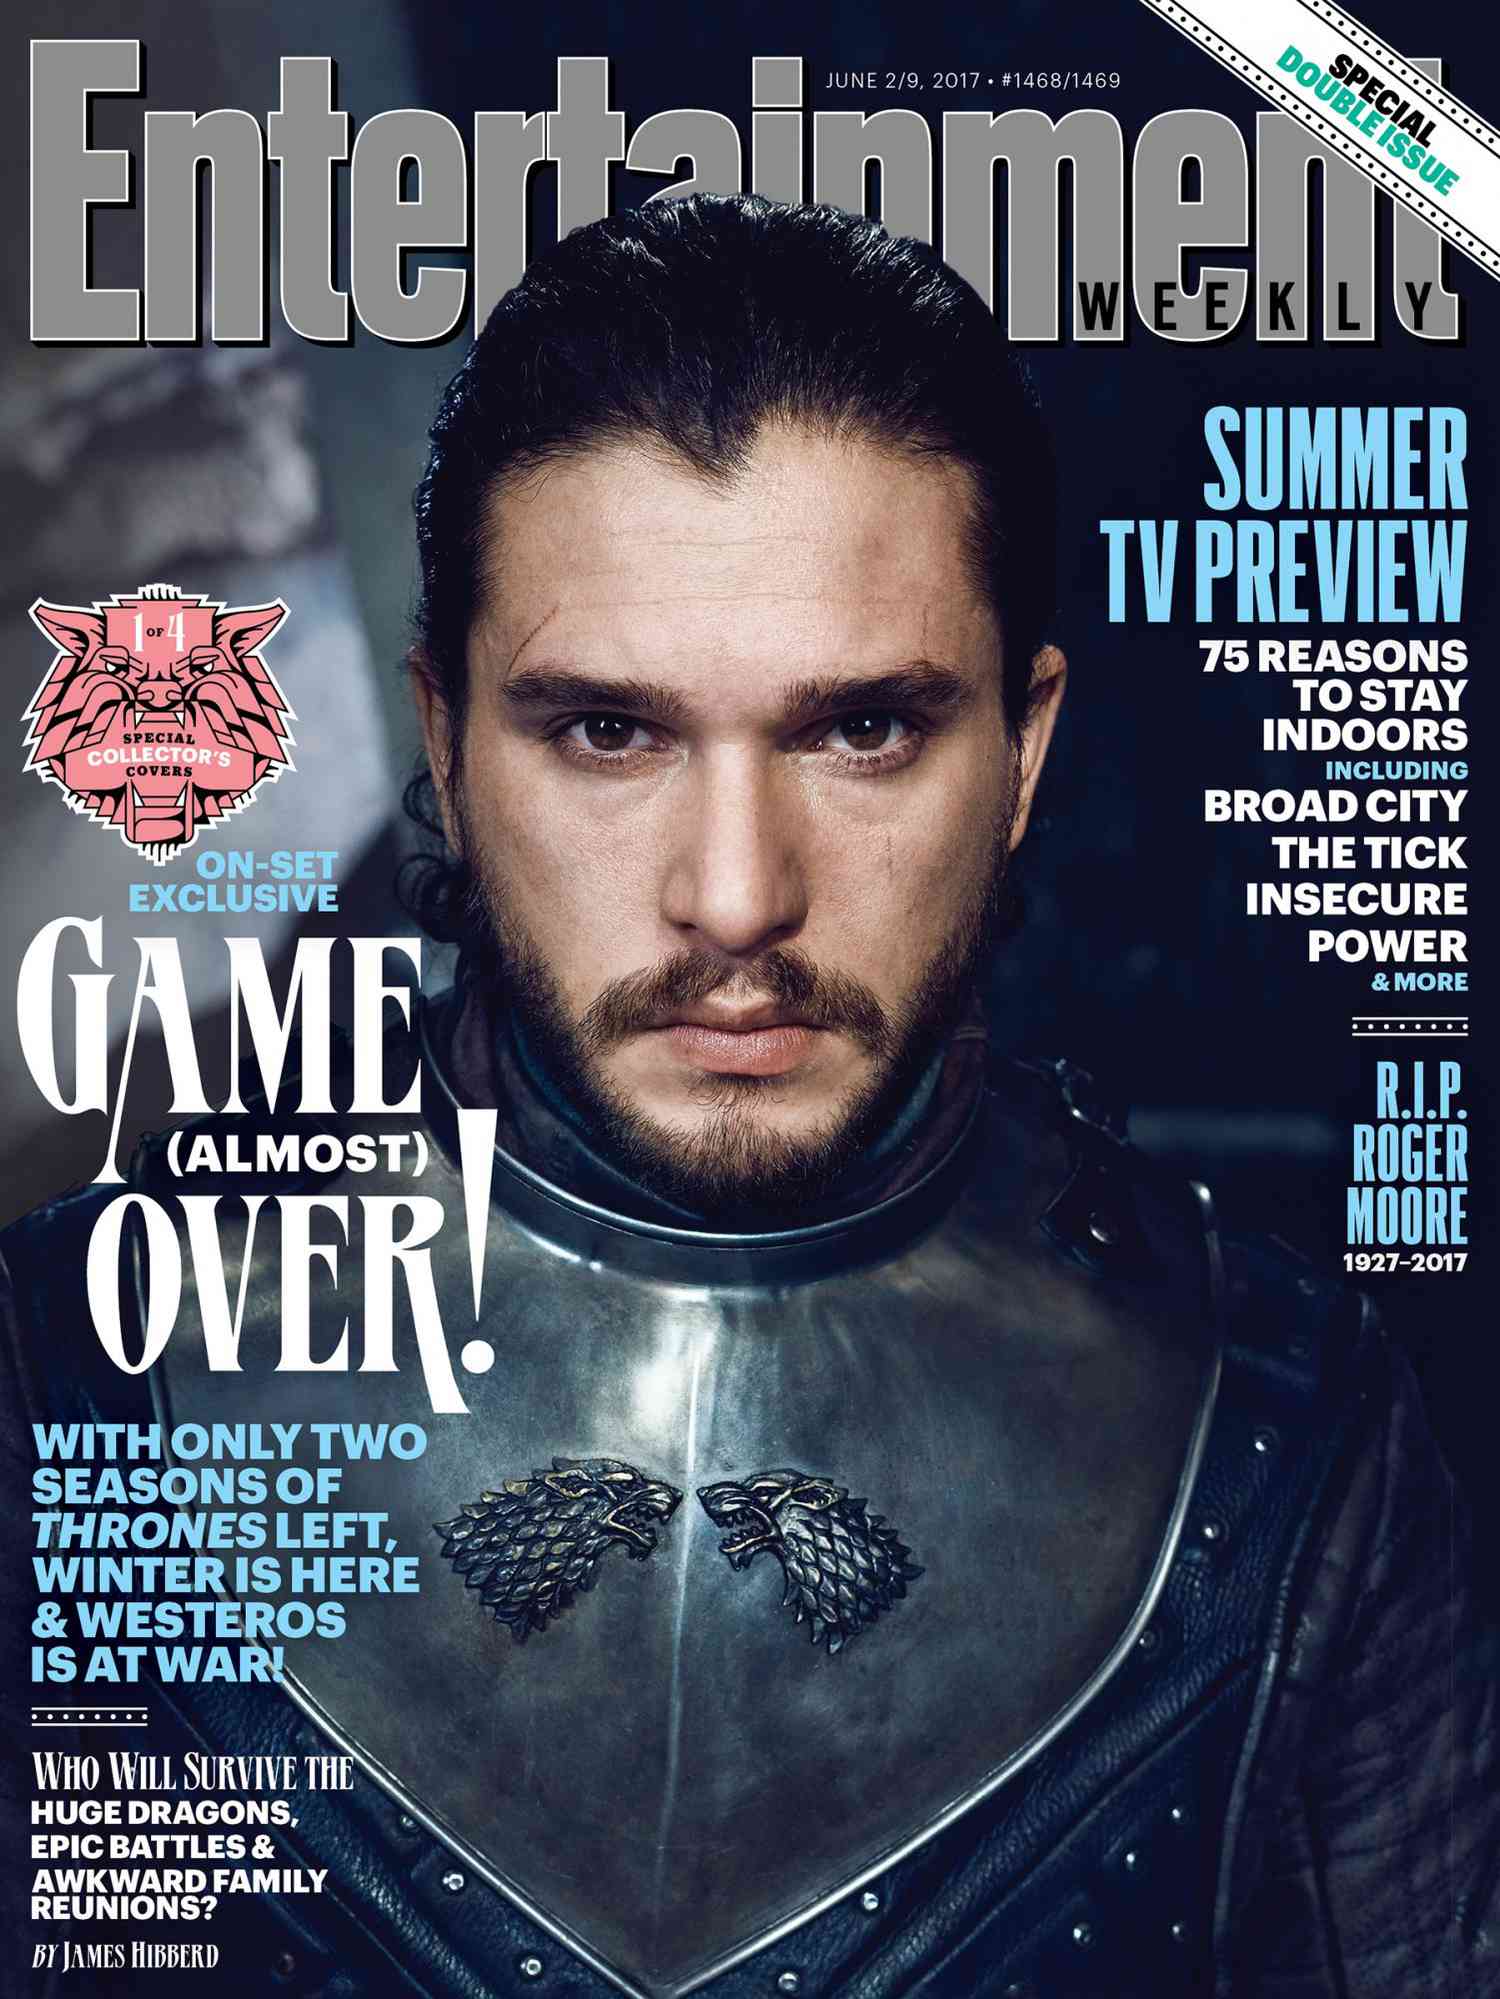 Jon Snow wears a&nbsp;direwolf sigil on his armor o one of our covers...&nbsp;